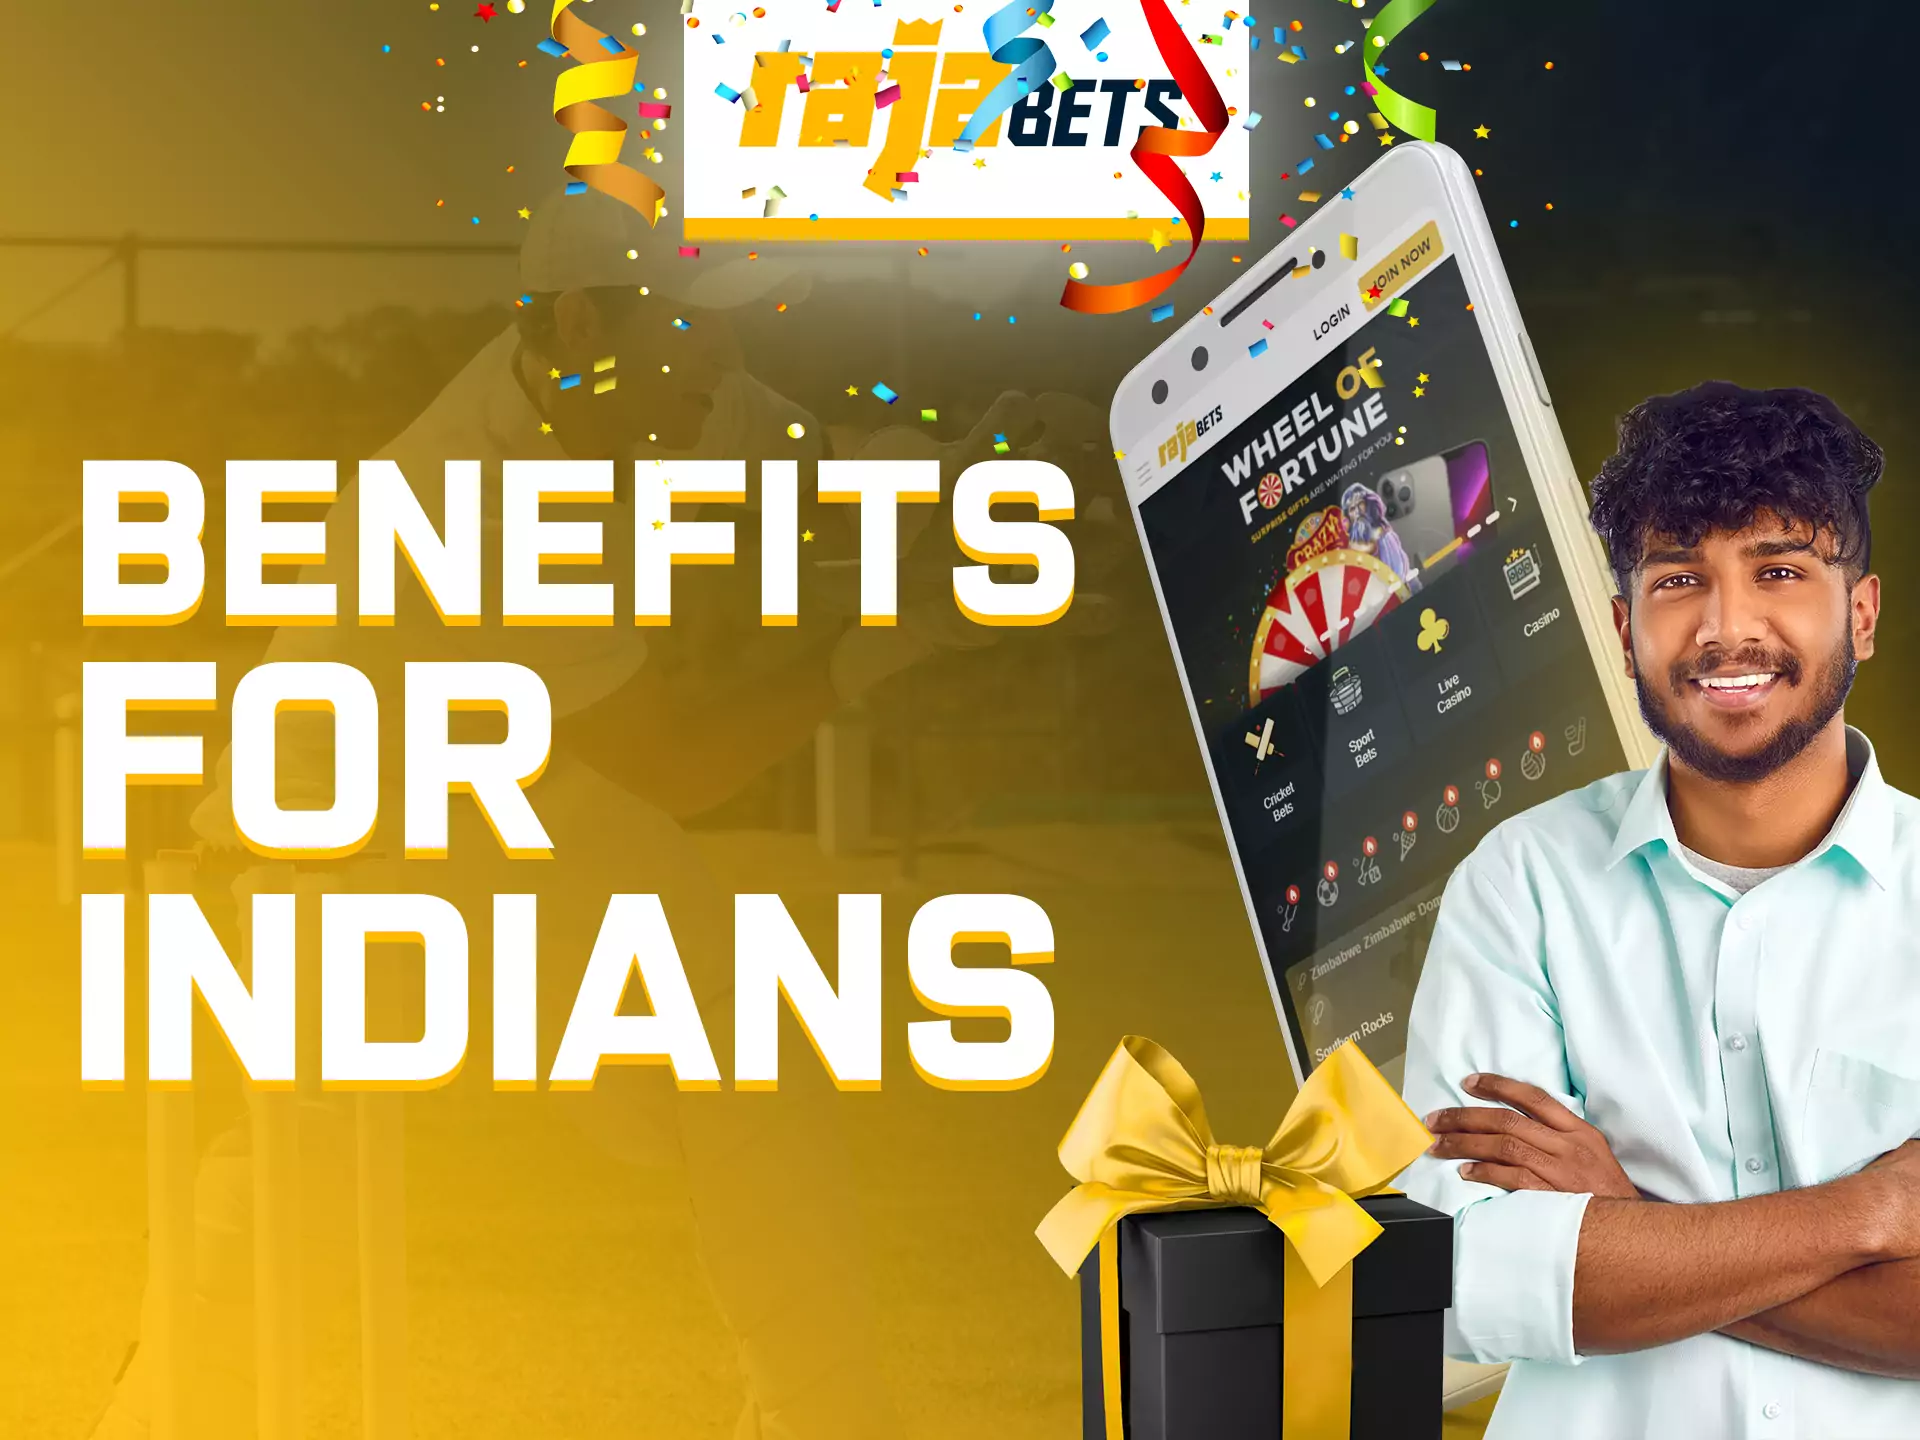 Rajabets app offers many benefits to Indian users.